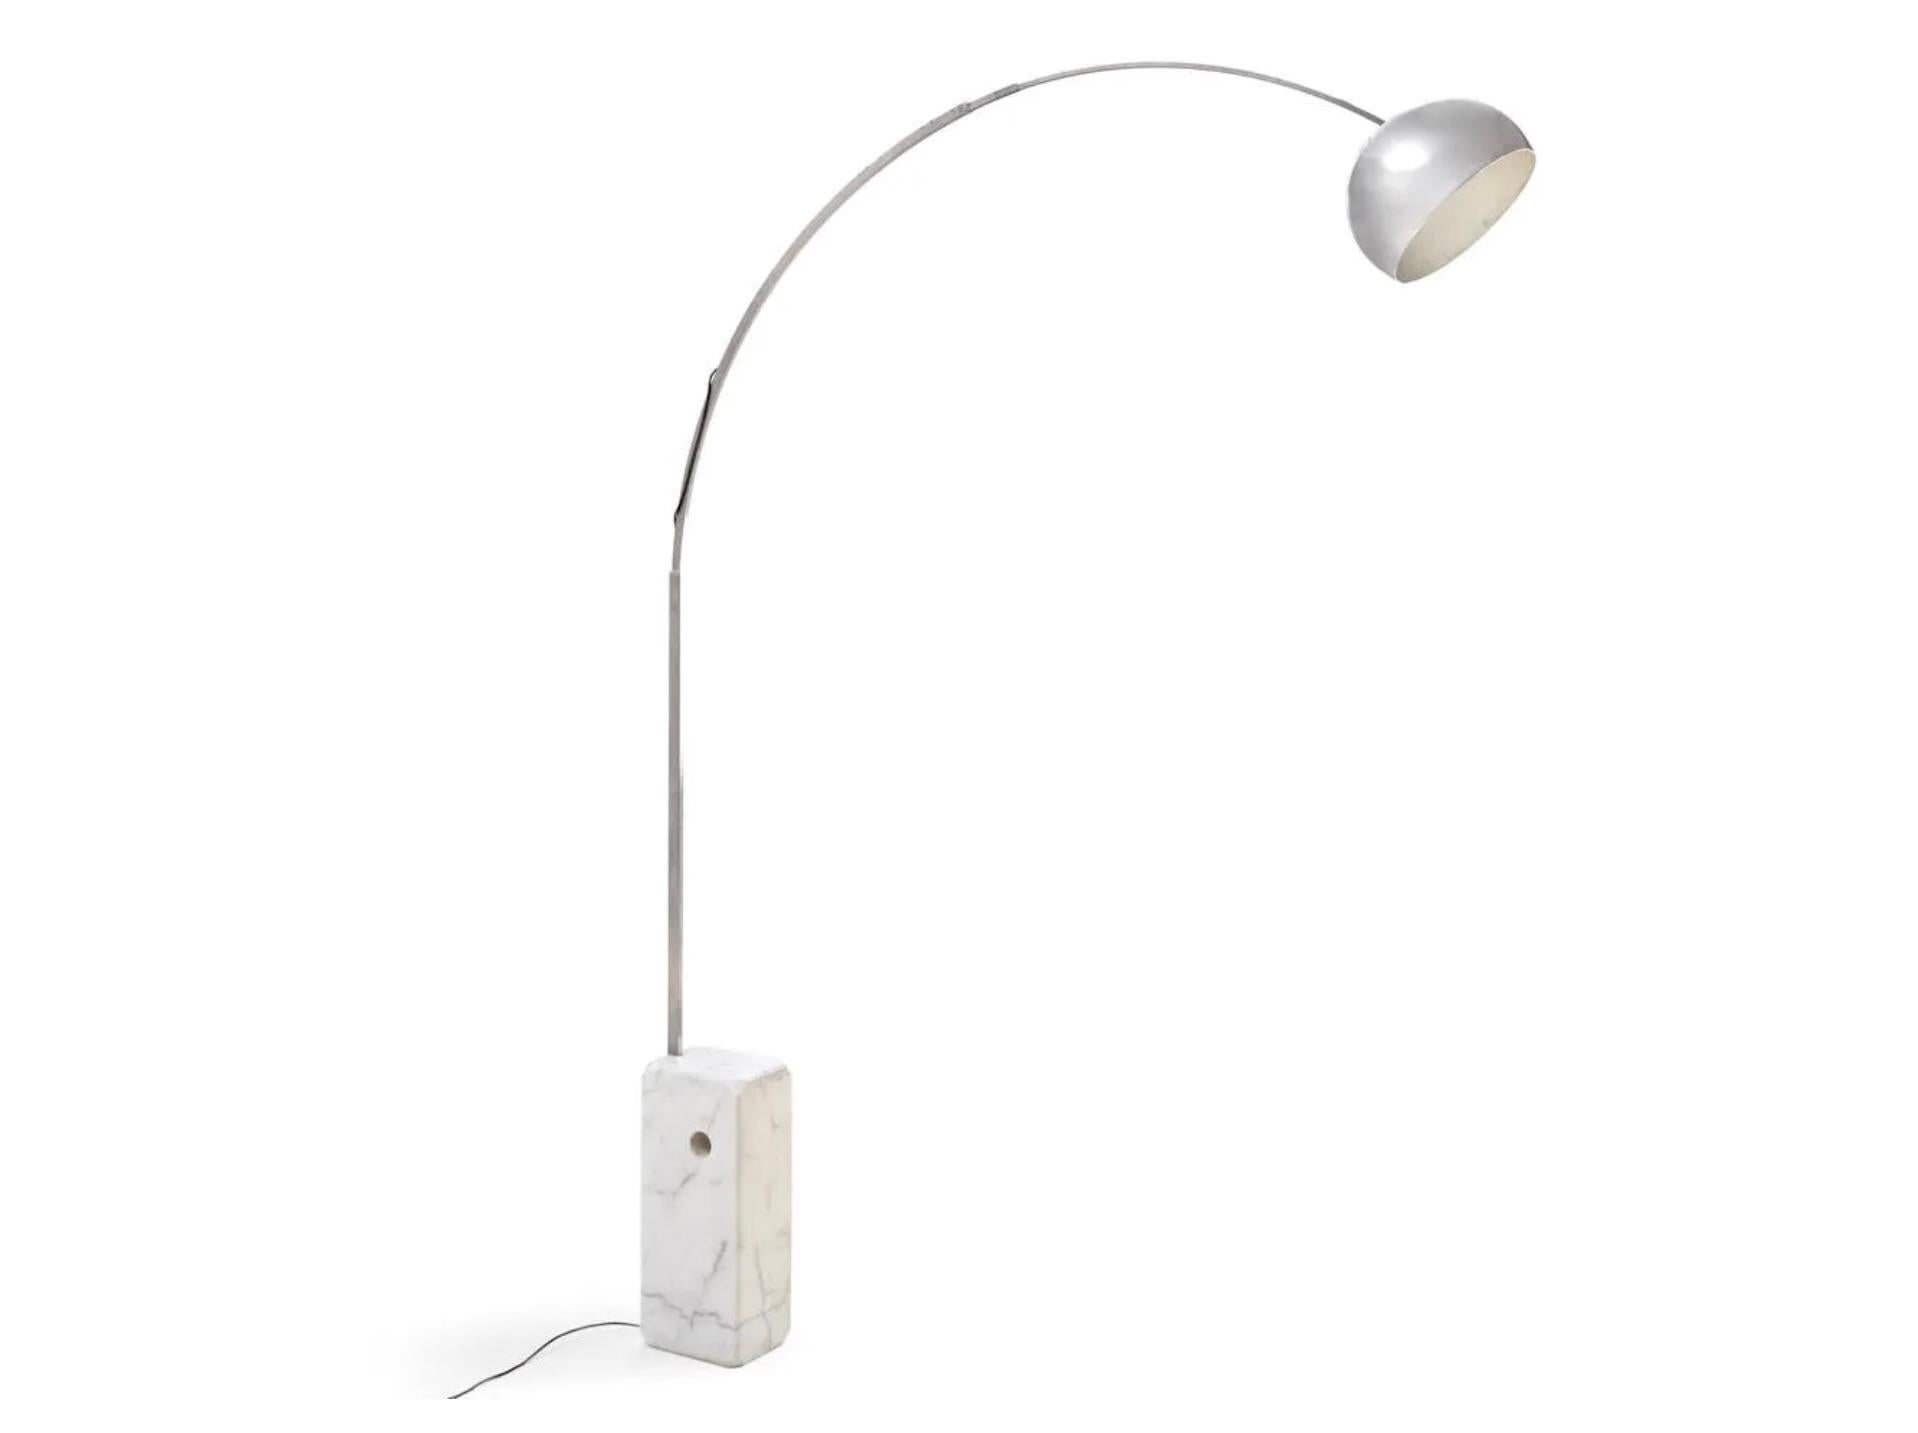 Achille Castiglioni Flos Arco Floor Lamp, Italy, Mid-20th c. In Good Condition For Sale In San Francisco, CA